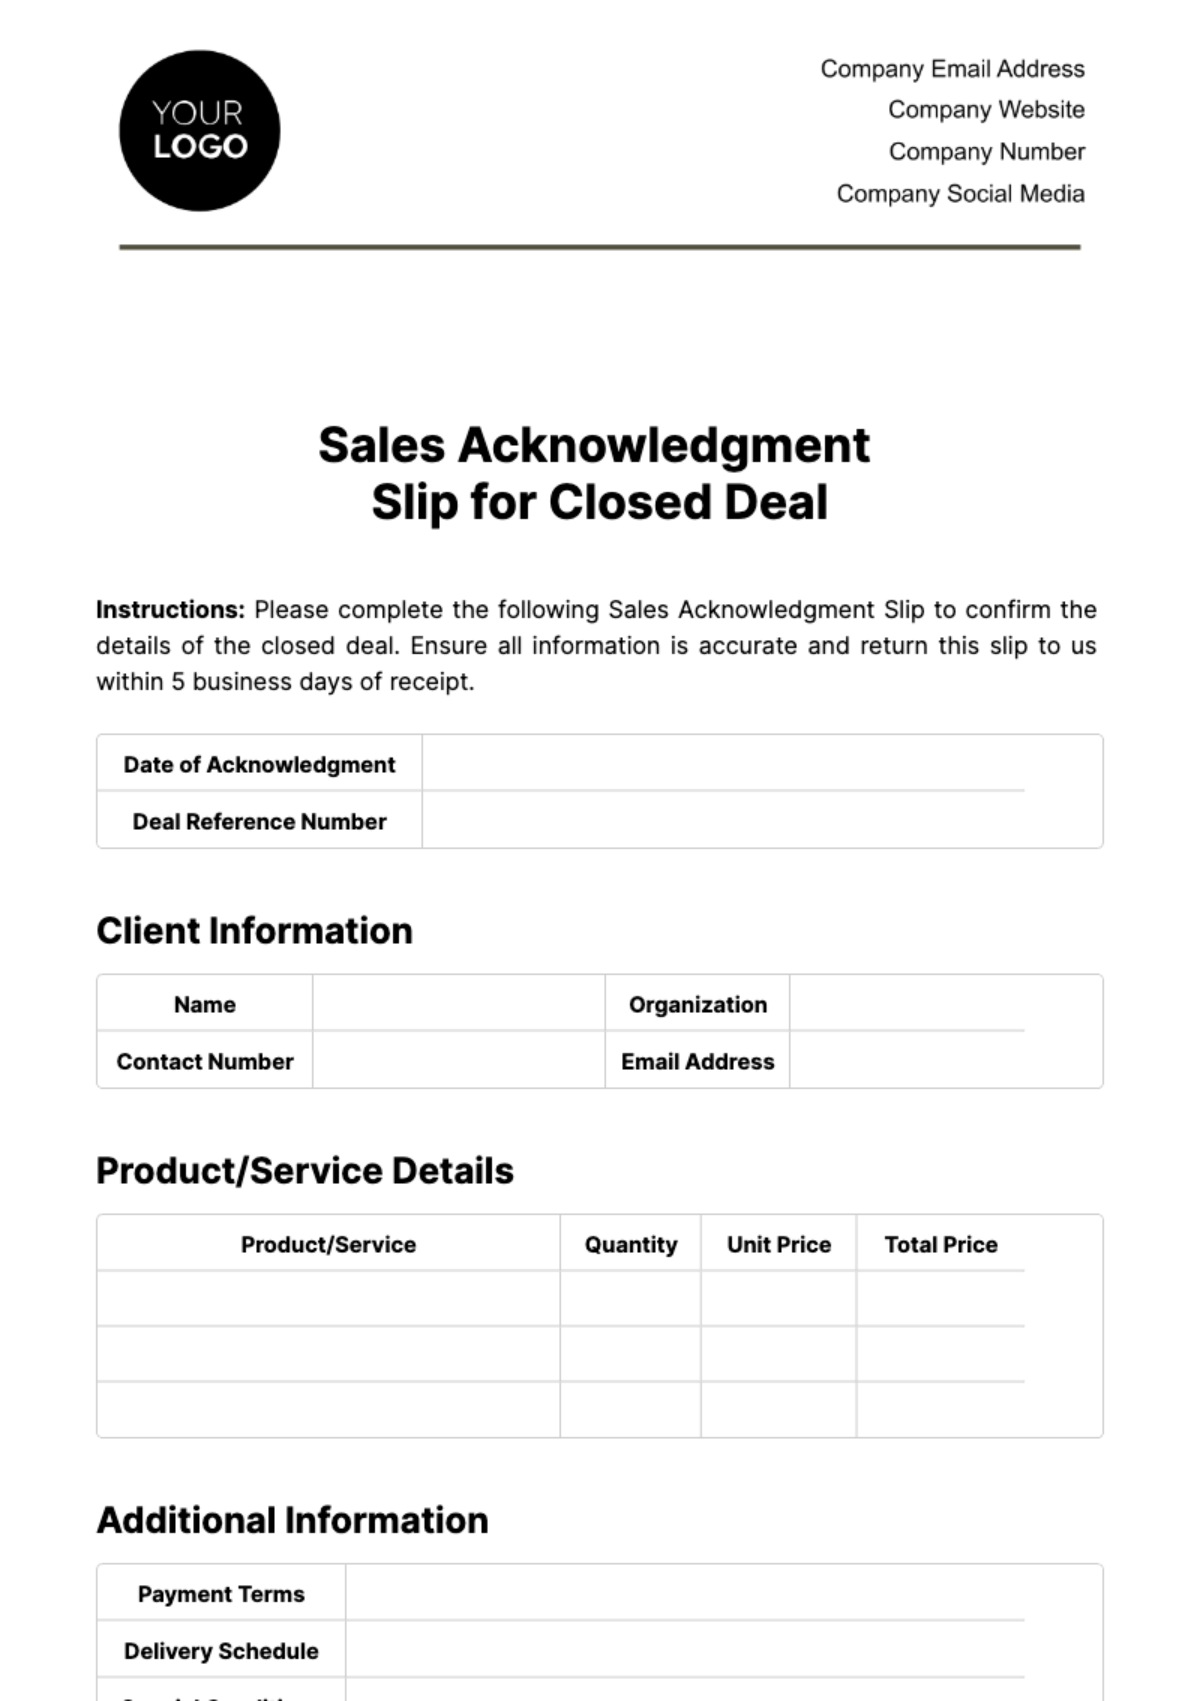 Sales Acknowledgment Slip for Closed Deal Template